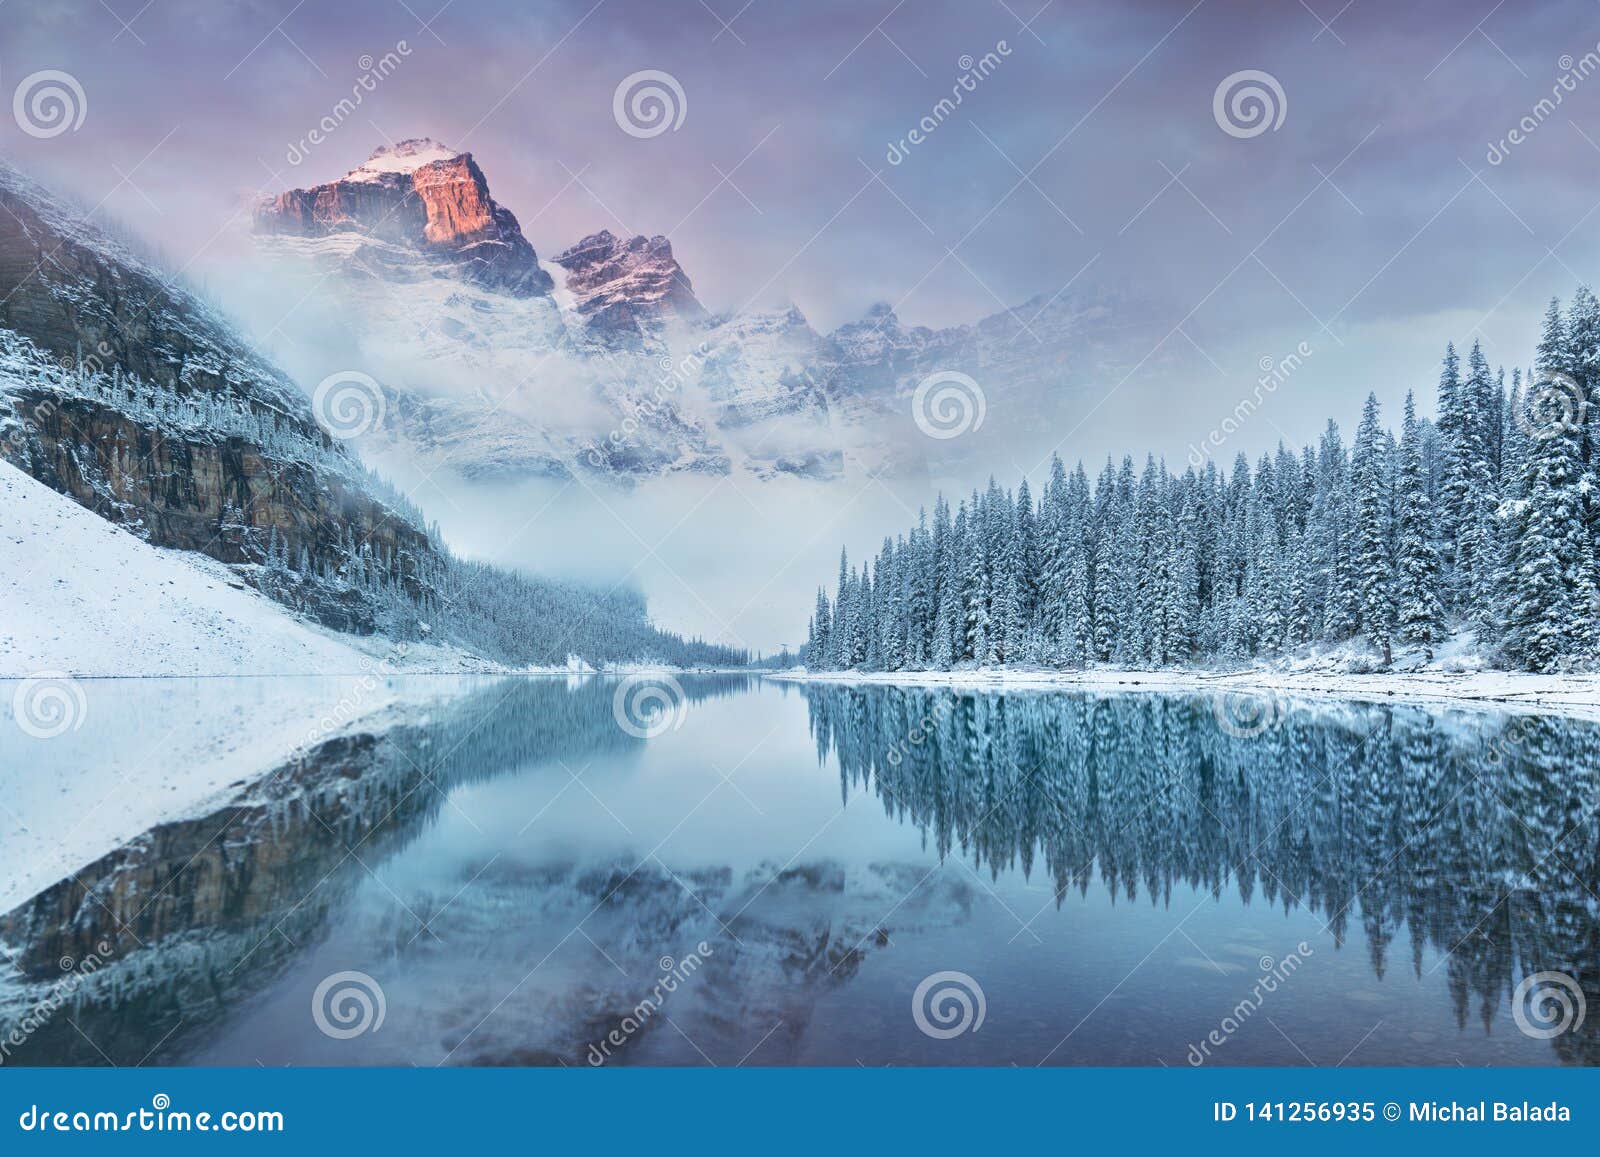 first snow morning at moraine lake in banff national park alberta canada. snow-covered winter mountain lake in a winter atmosphere